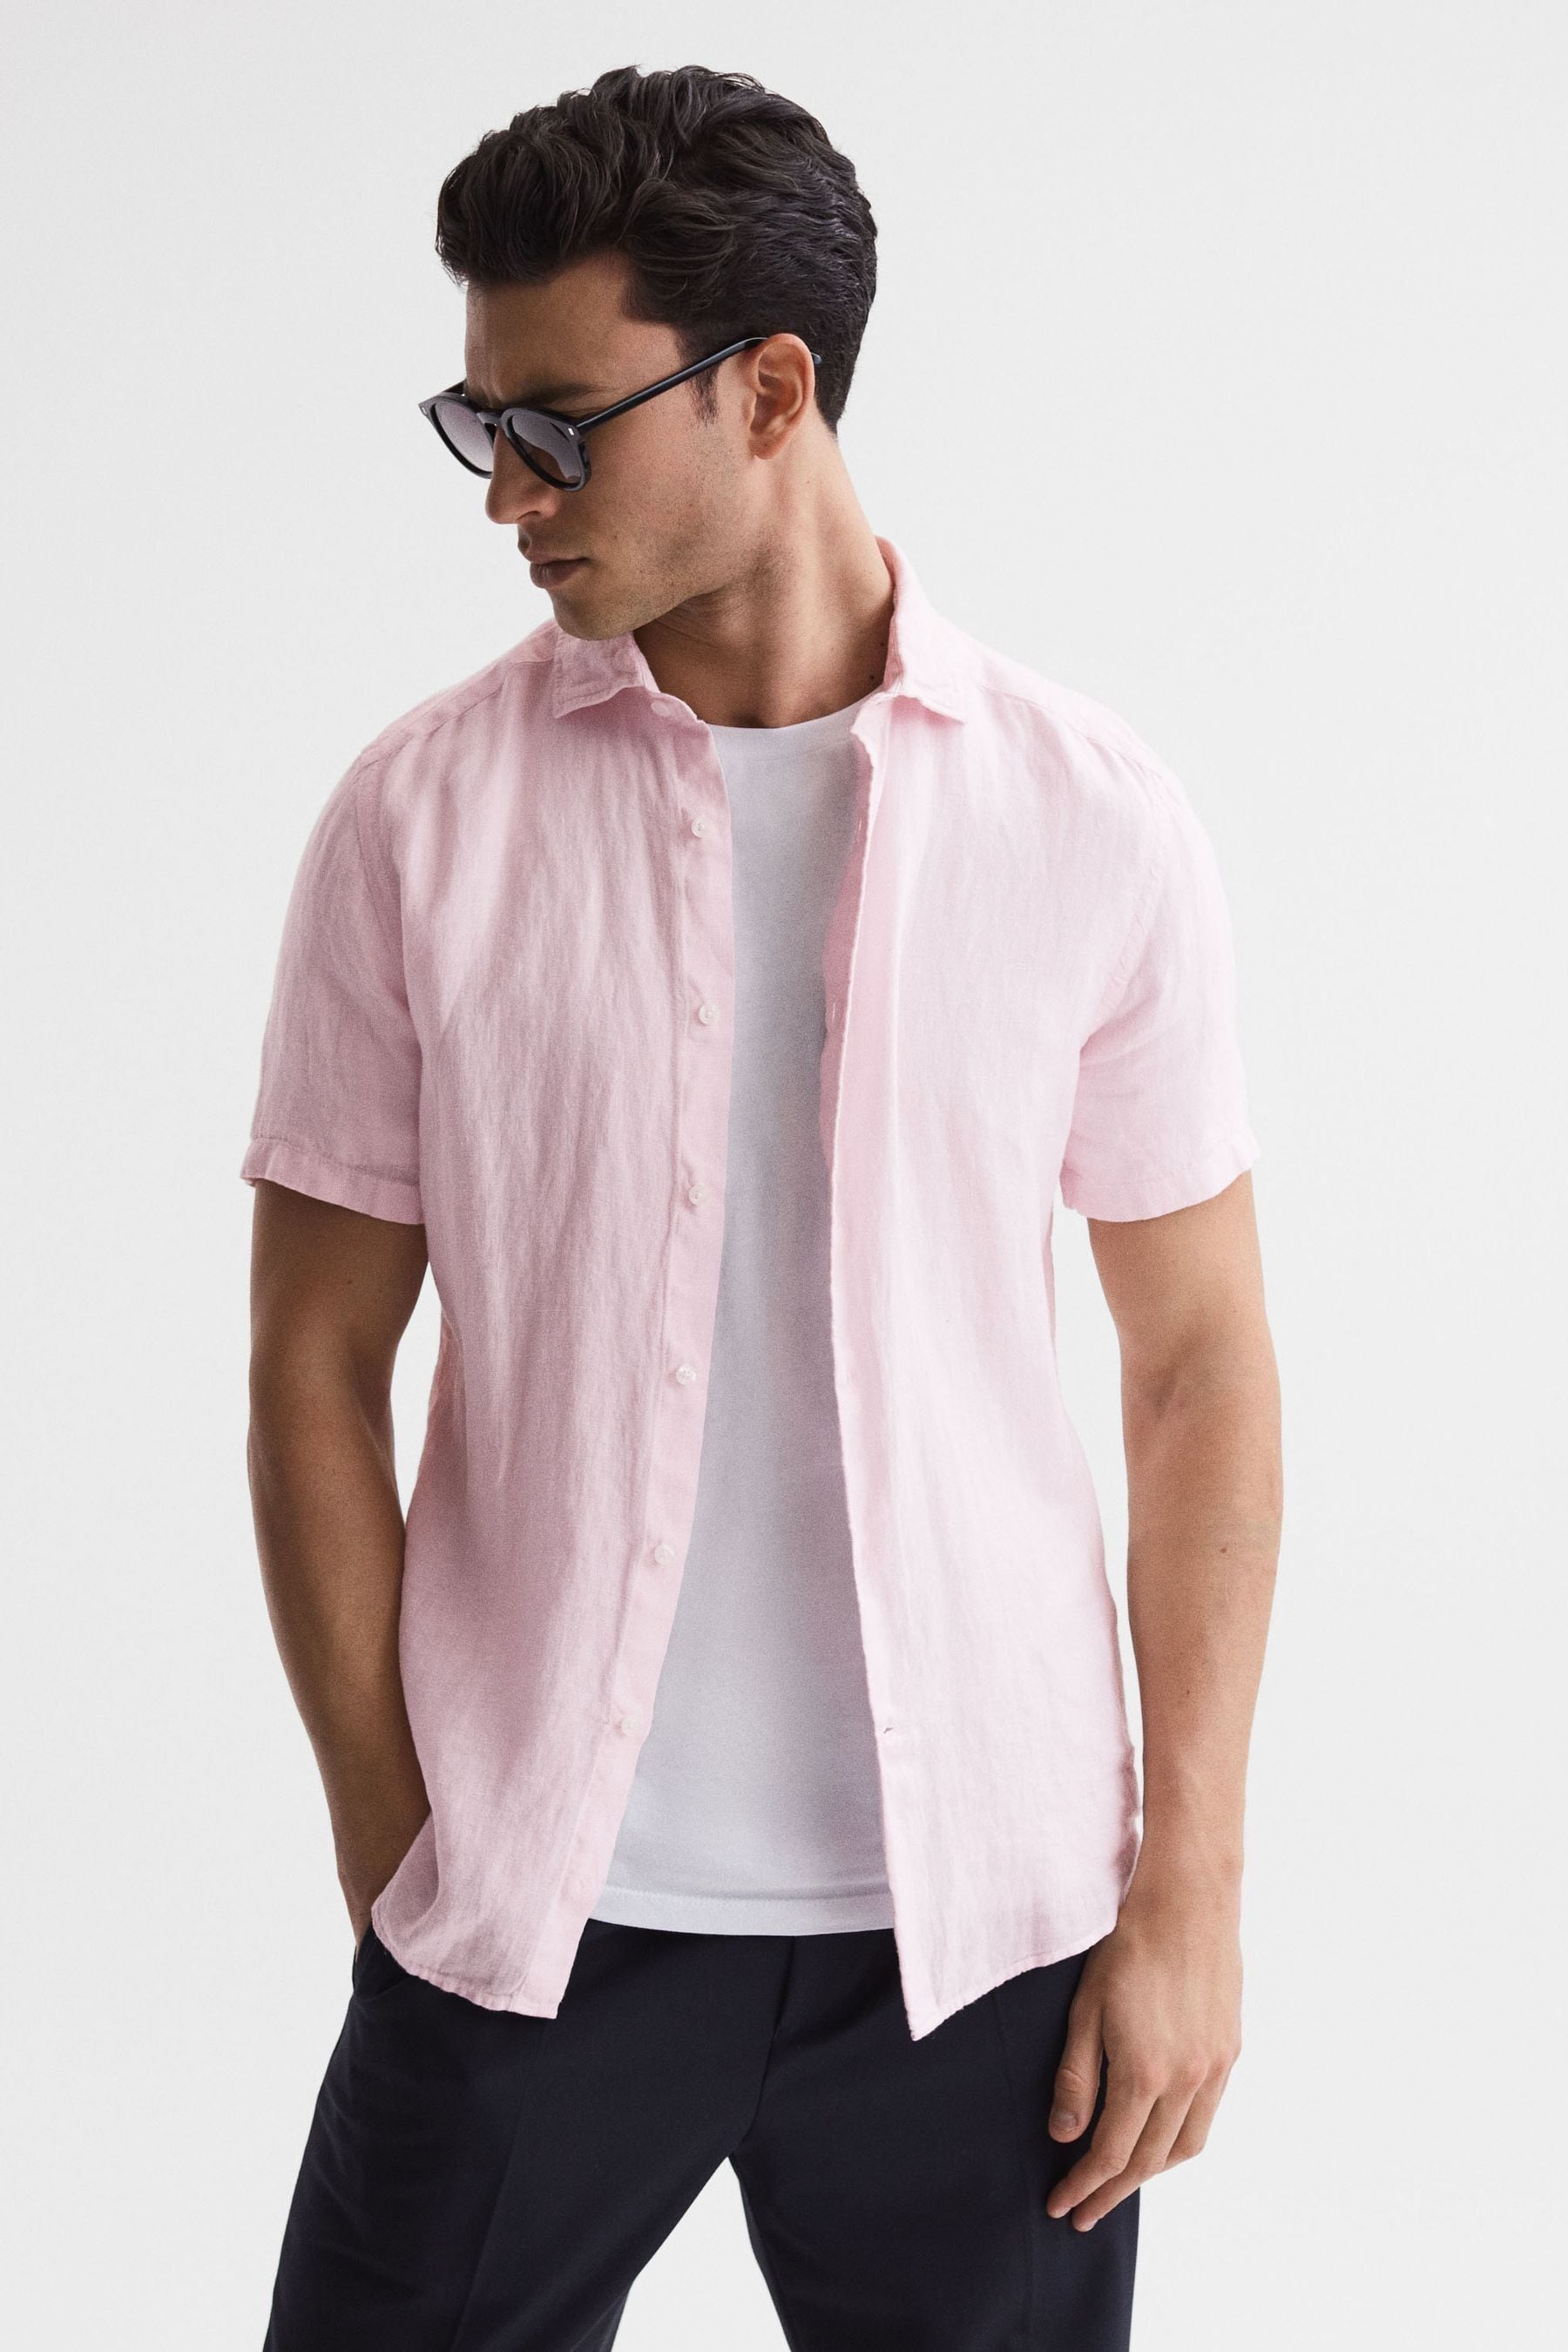 Holiday - Soft Pink Slim Fit...